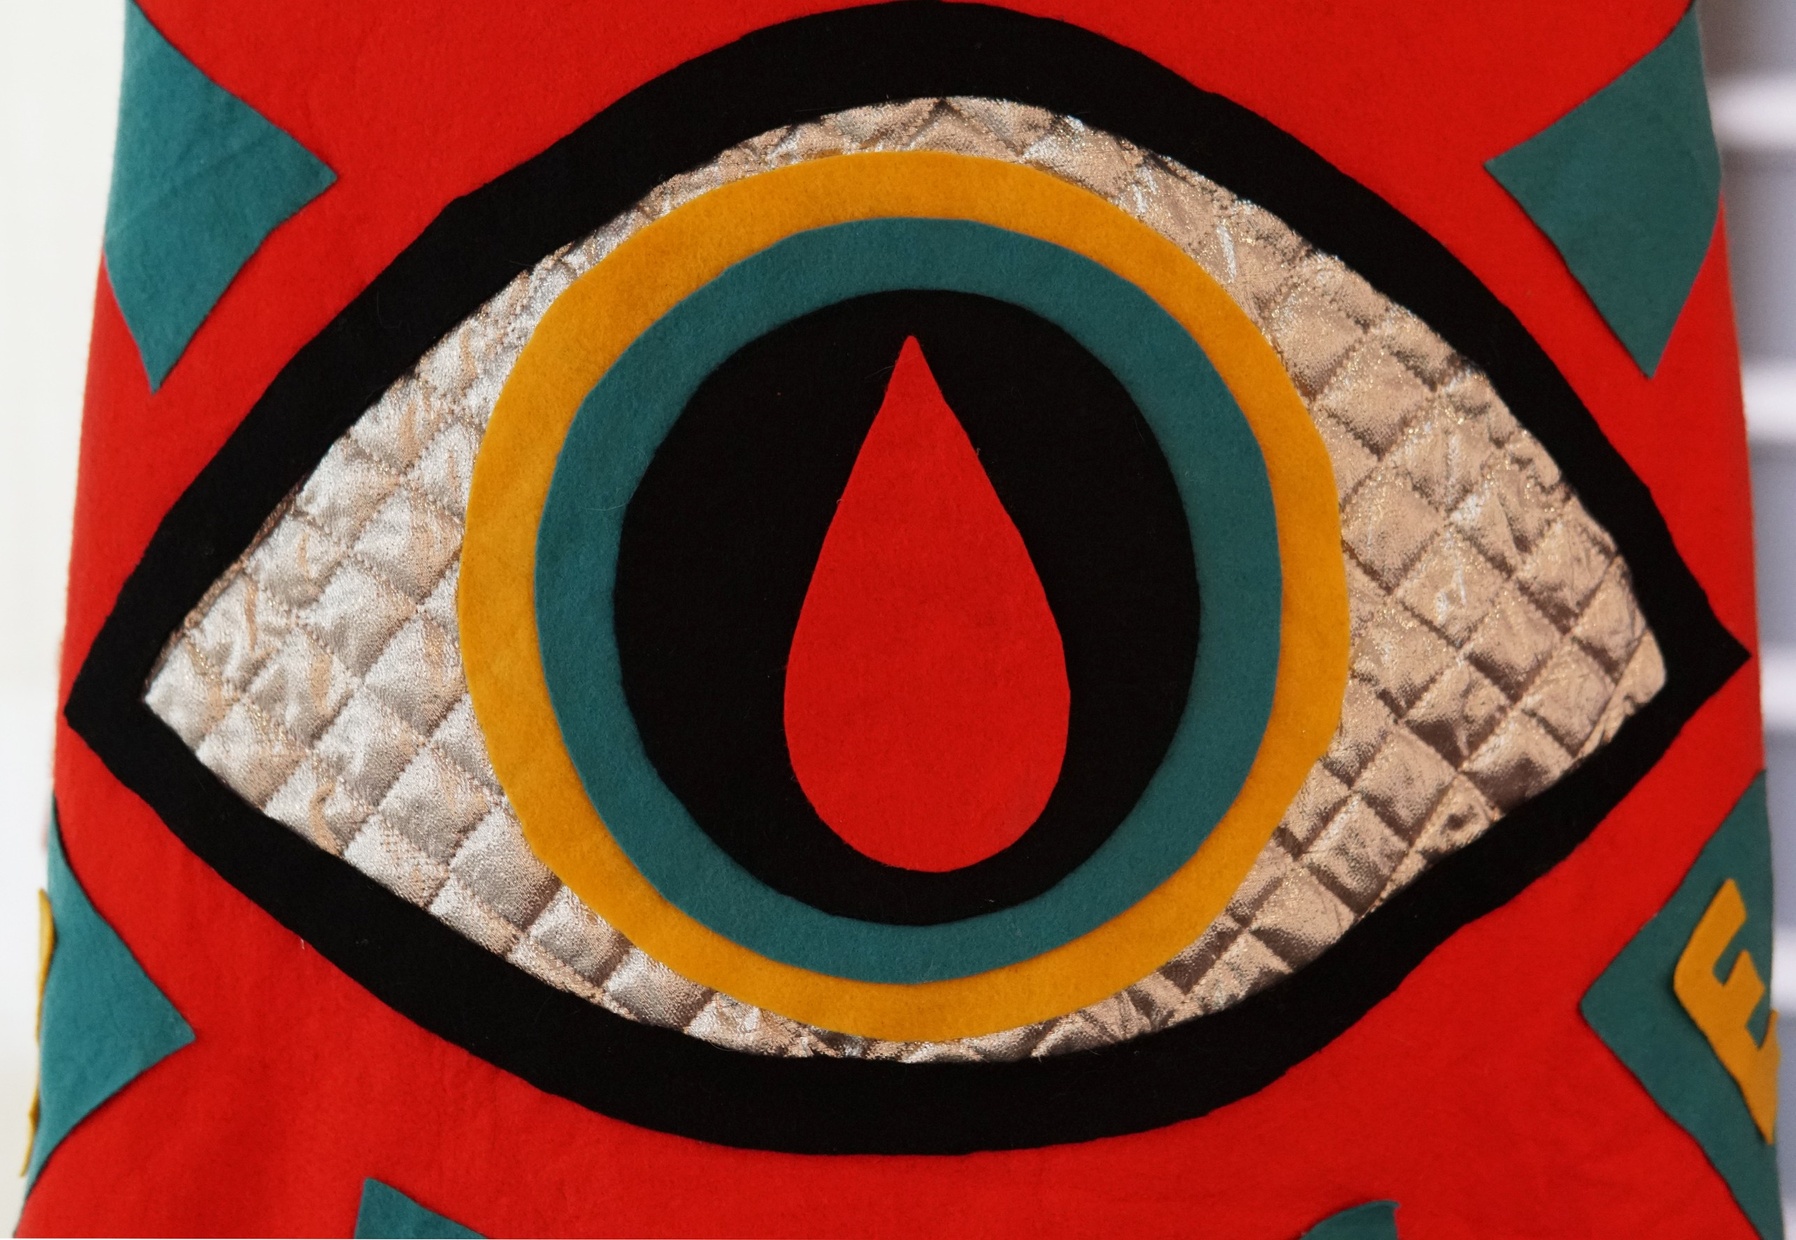 A long, red cape with a large eye, made of red, black, blue, yellow, and silver fabric; blue triangles, bearing yellow letters “L O V E,” radiate from the eye.